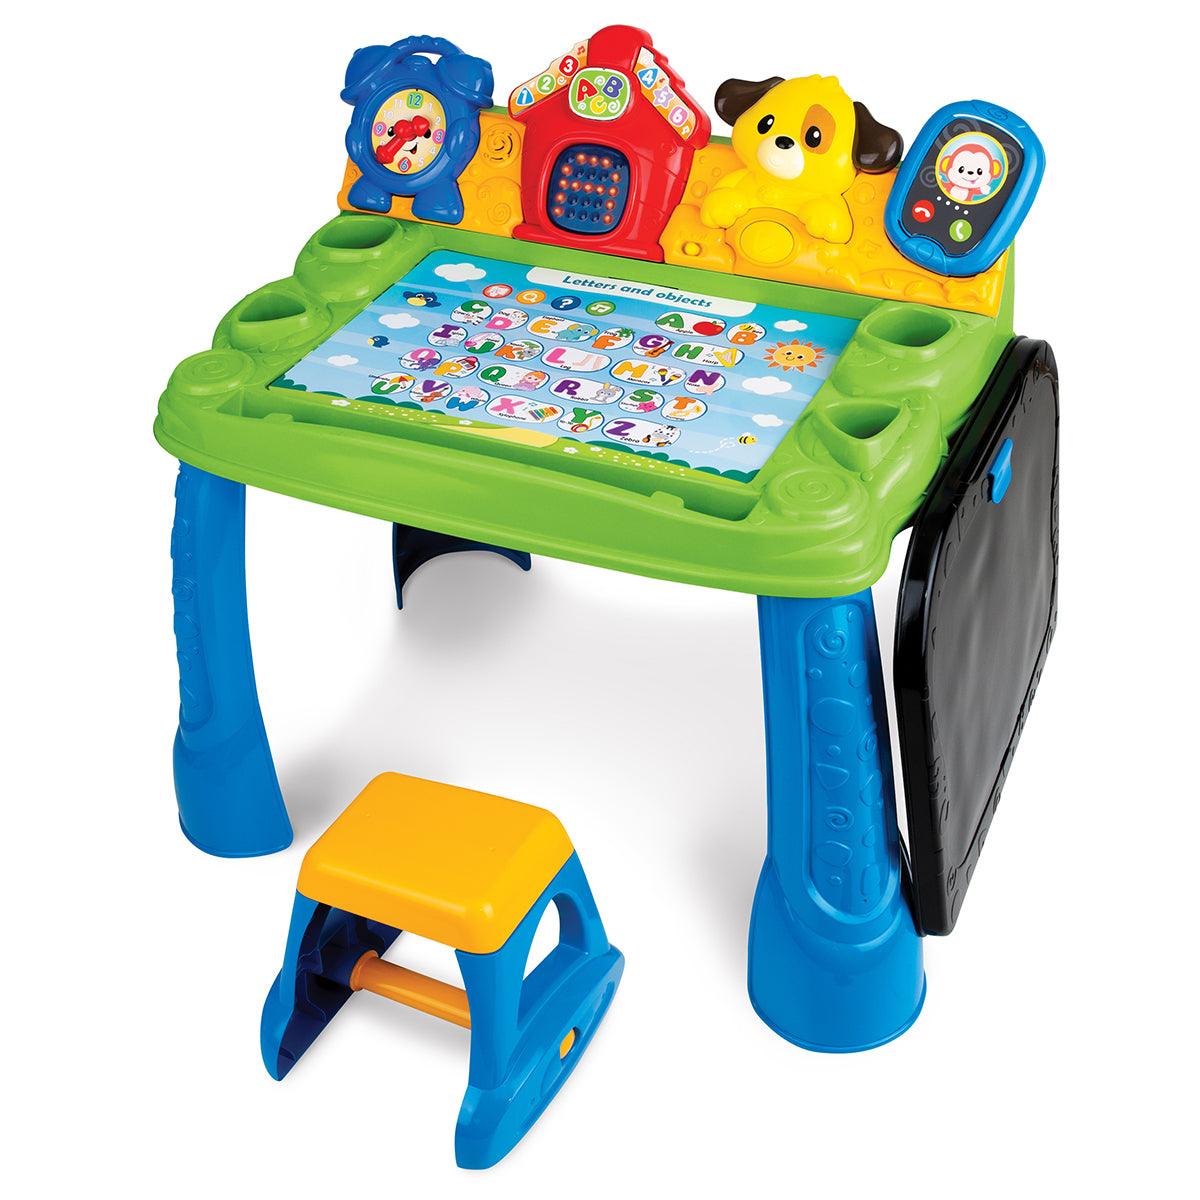 Smart Touch and Learn Activity Desk with Stool - Ourkids - WinFun